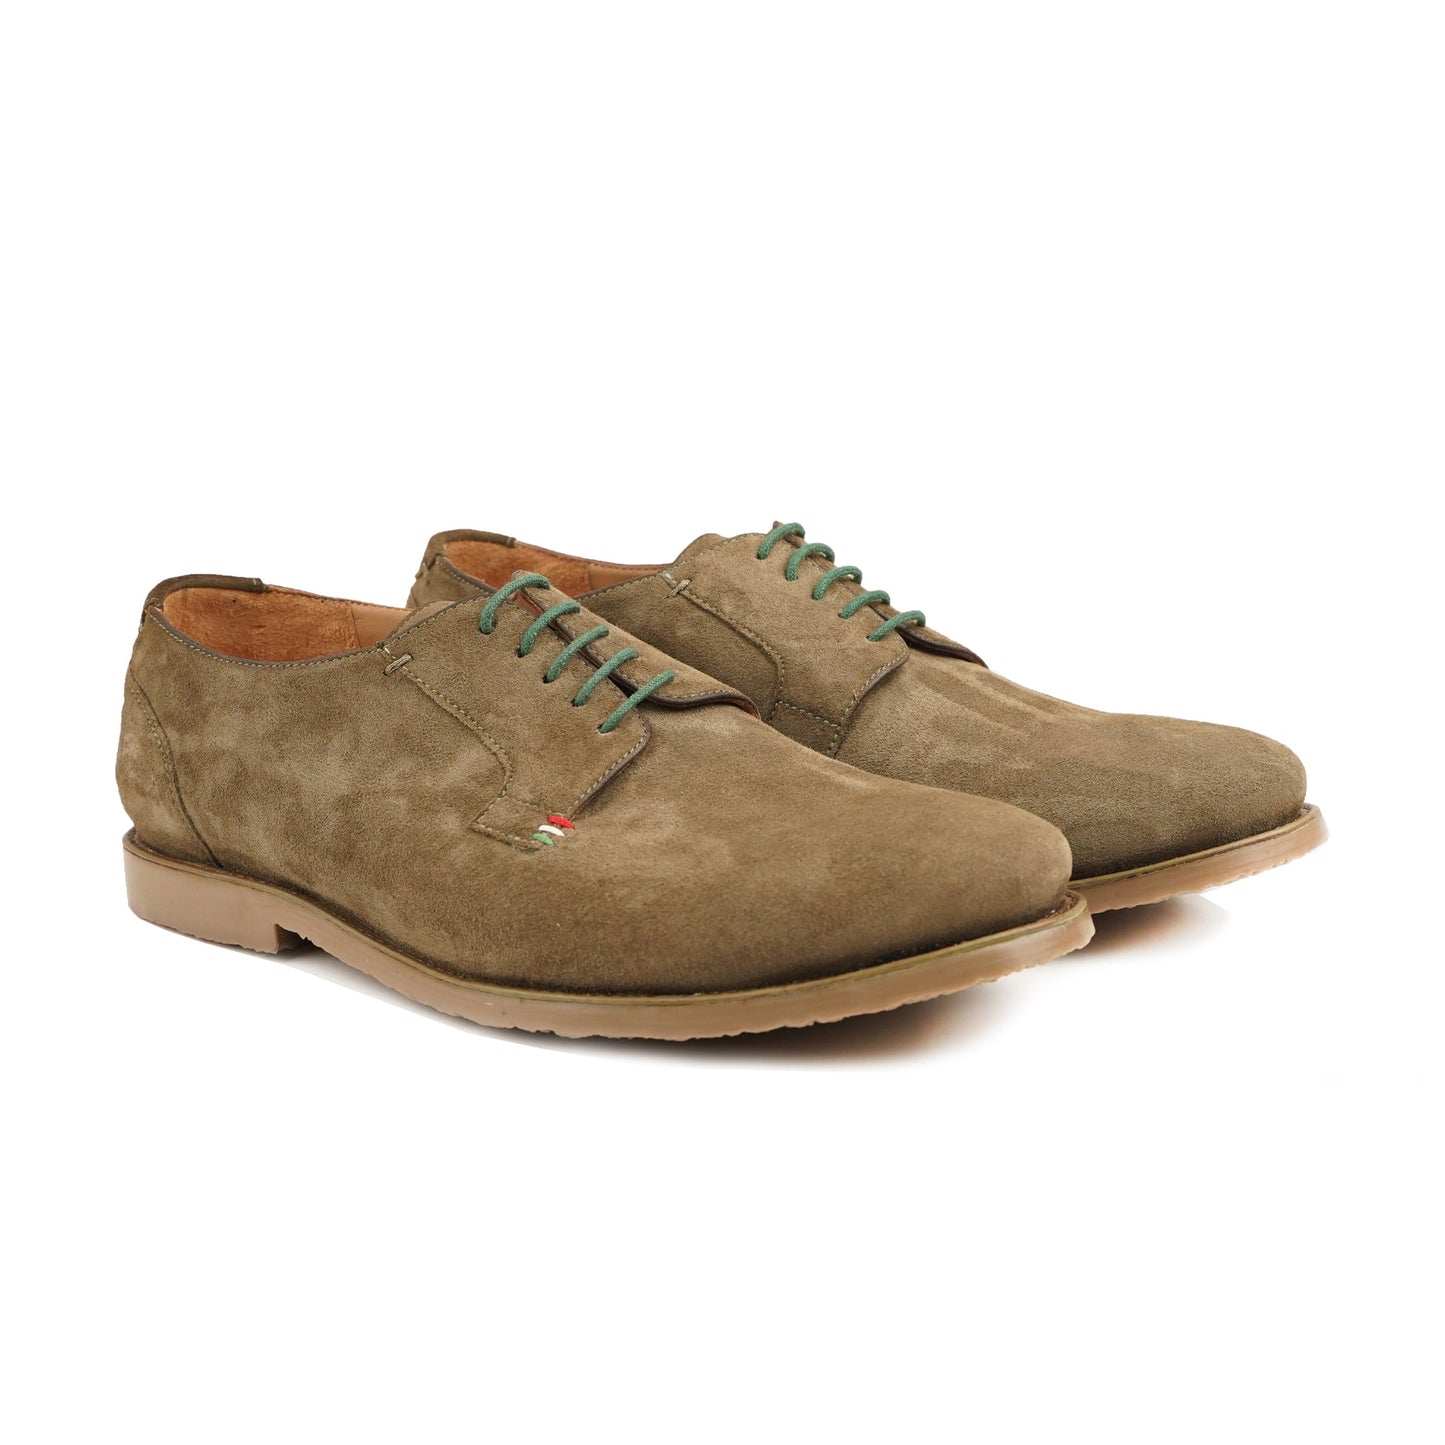 Casual Suede Leather Derby Shoes: Effortless Style and Comfort in a Minimalist Design Casual Suede Leather Derby Shoes: Effortless Style and Comfort in a Minimalist Design, Derby Boots, derby shoes, derby shoes men, GOMILA(MADE TO ORDER)_DERBY, Leather Boots